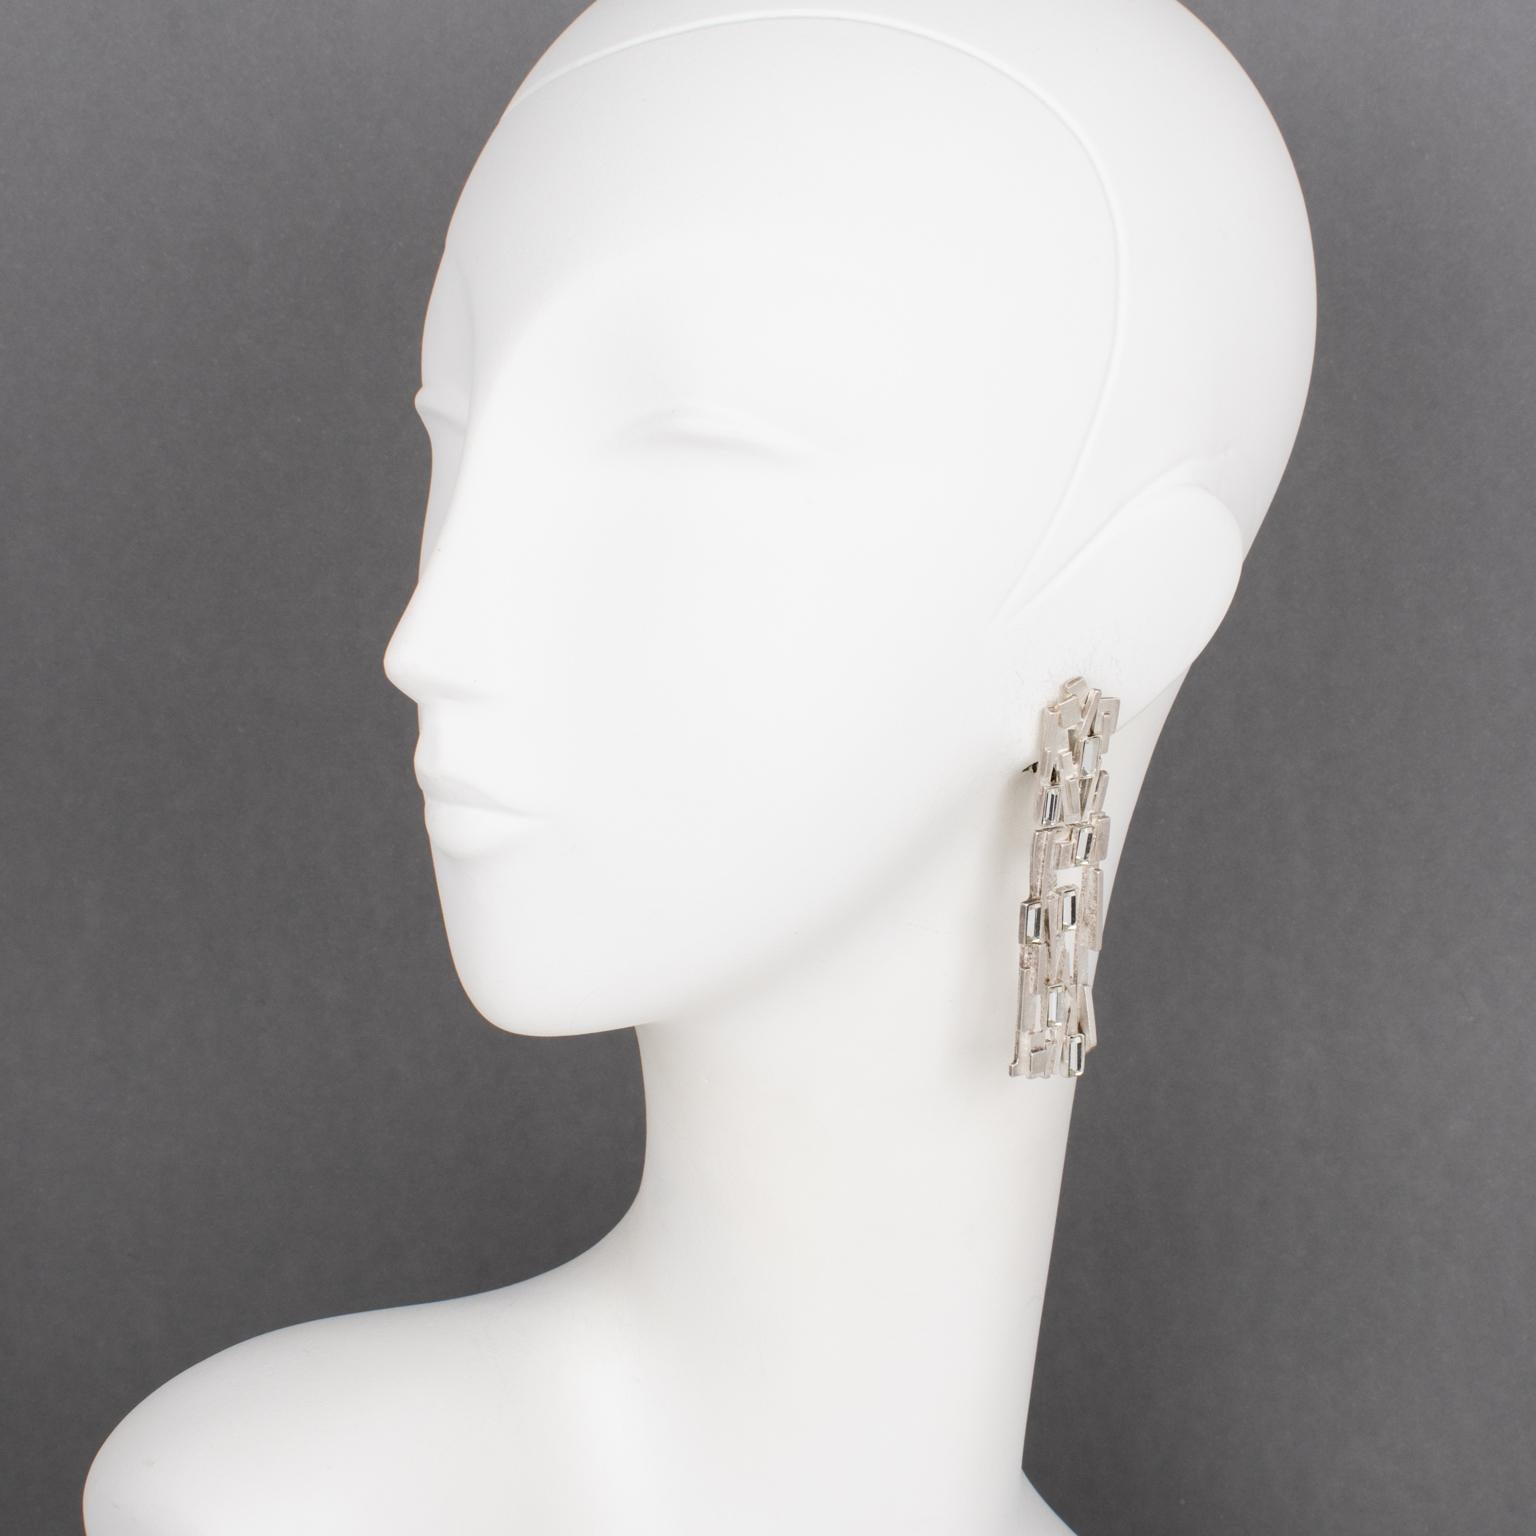 Claude Montana designed these stunning brutalist clip-on earrings for Marie Paris in the 1980s. The pieces boast a silverplate dangling shape with carving and a see-thru pattern embellished with baguette-shaped crystal rhinestones. Each piece is